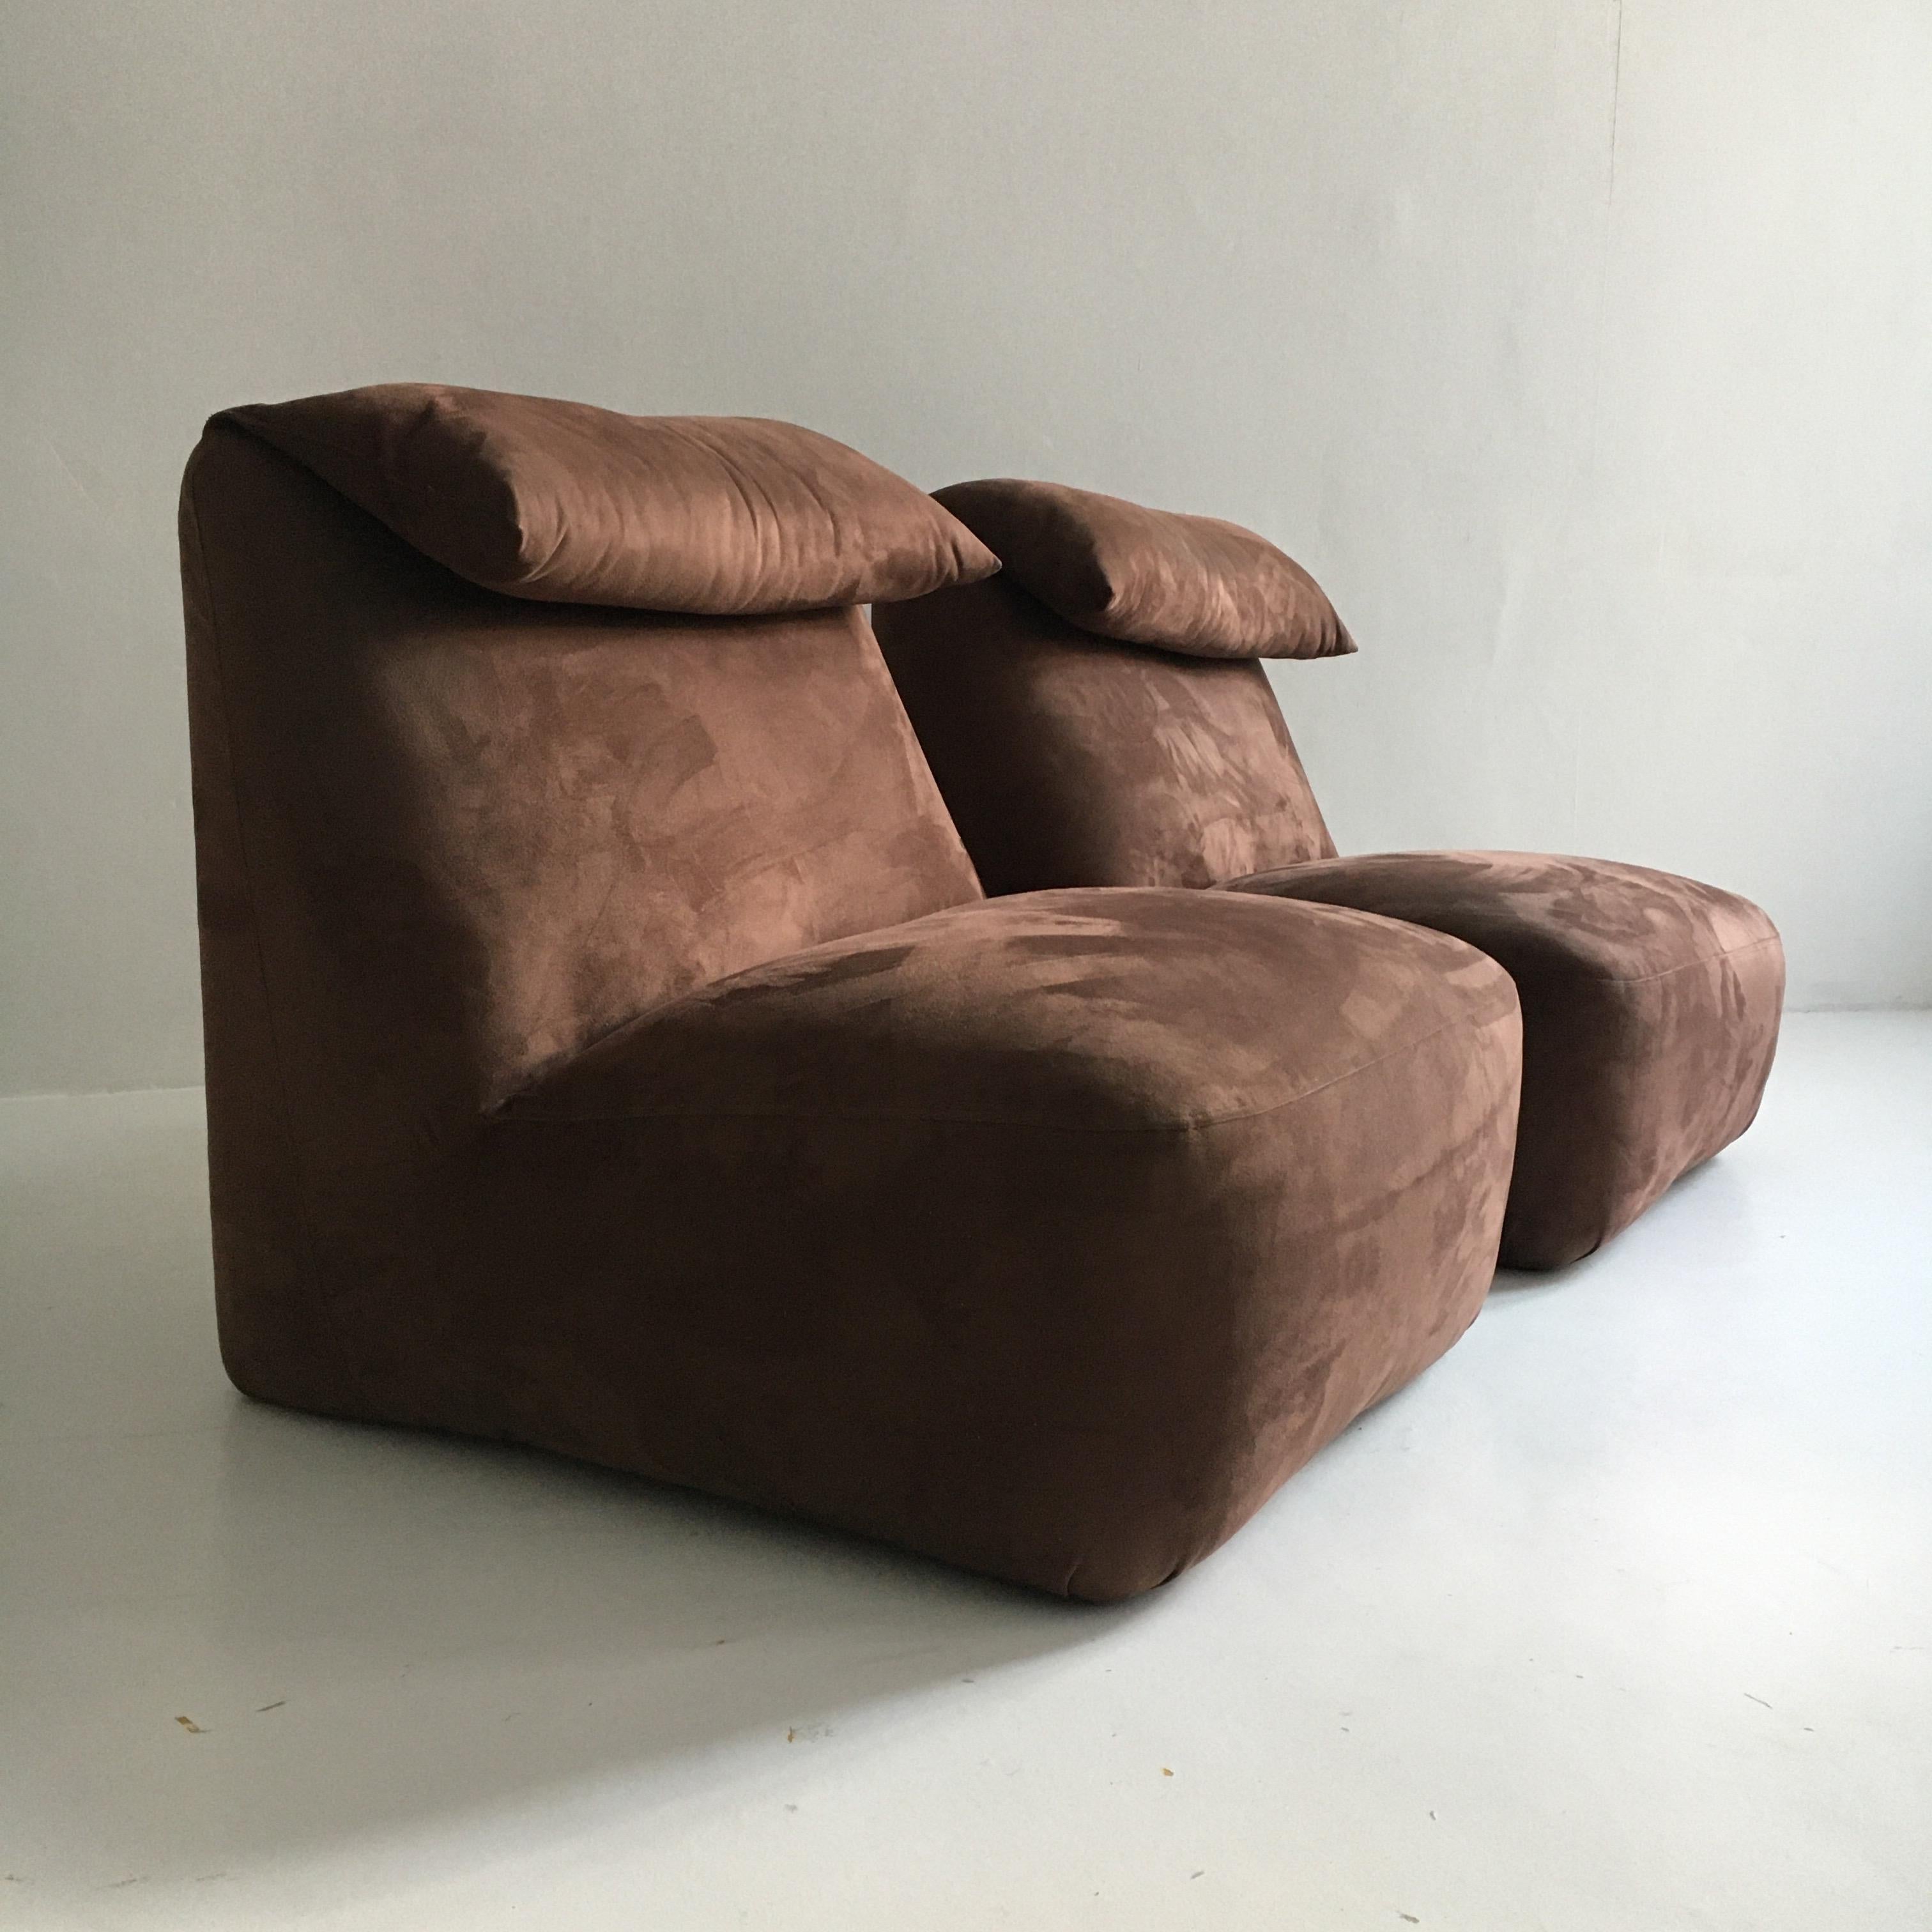 Mario Bellini Pair of 'Le Bambole' Lounge Chairs, Italy, 1970s In Good Condition For Sale In Vienna, AT